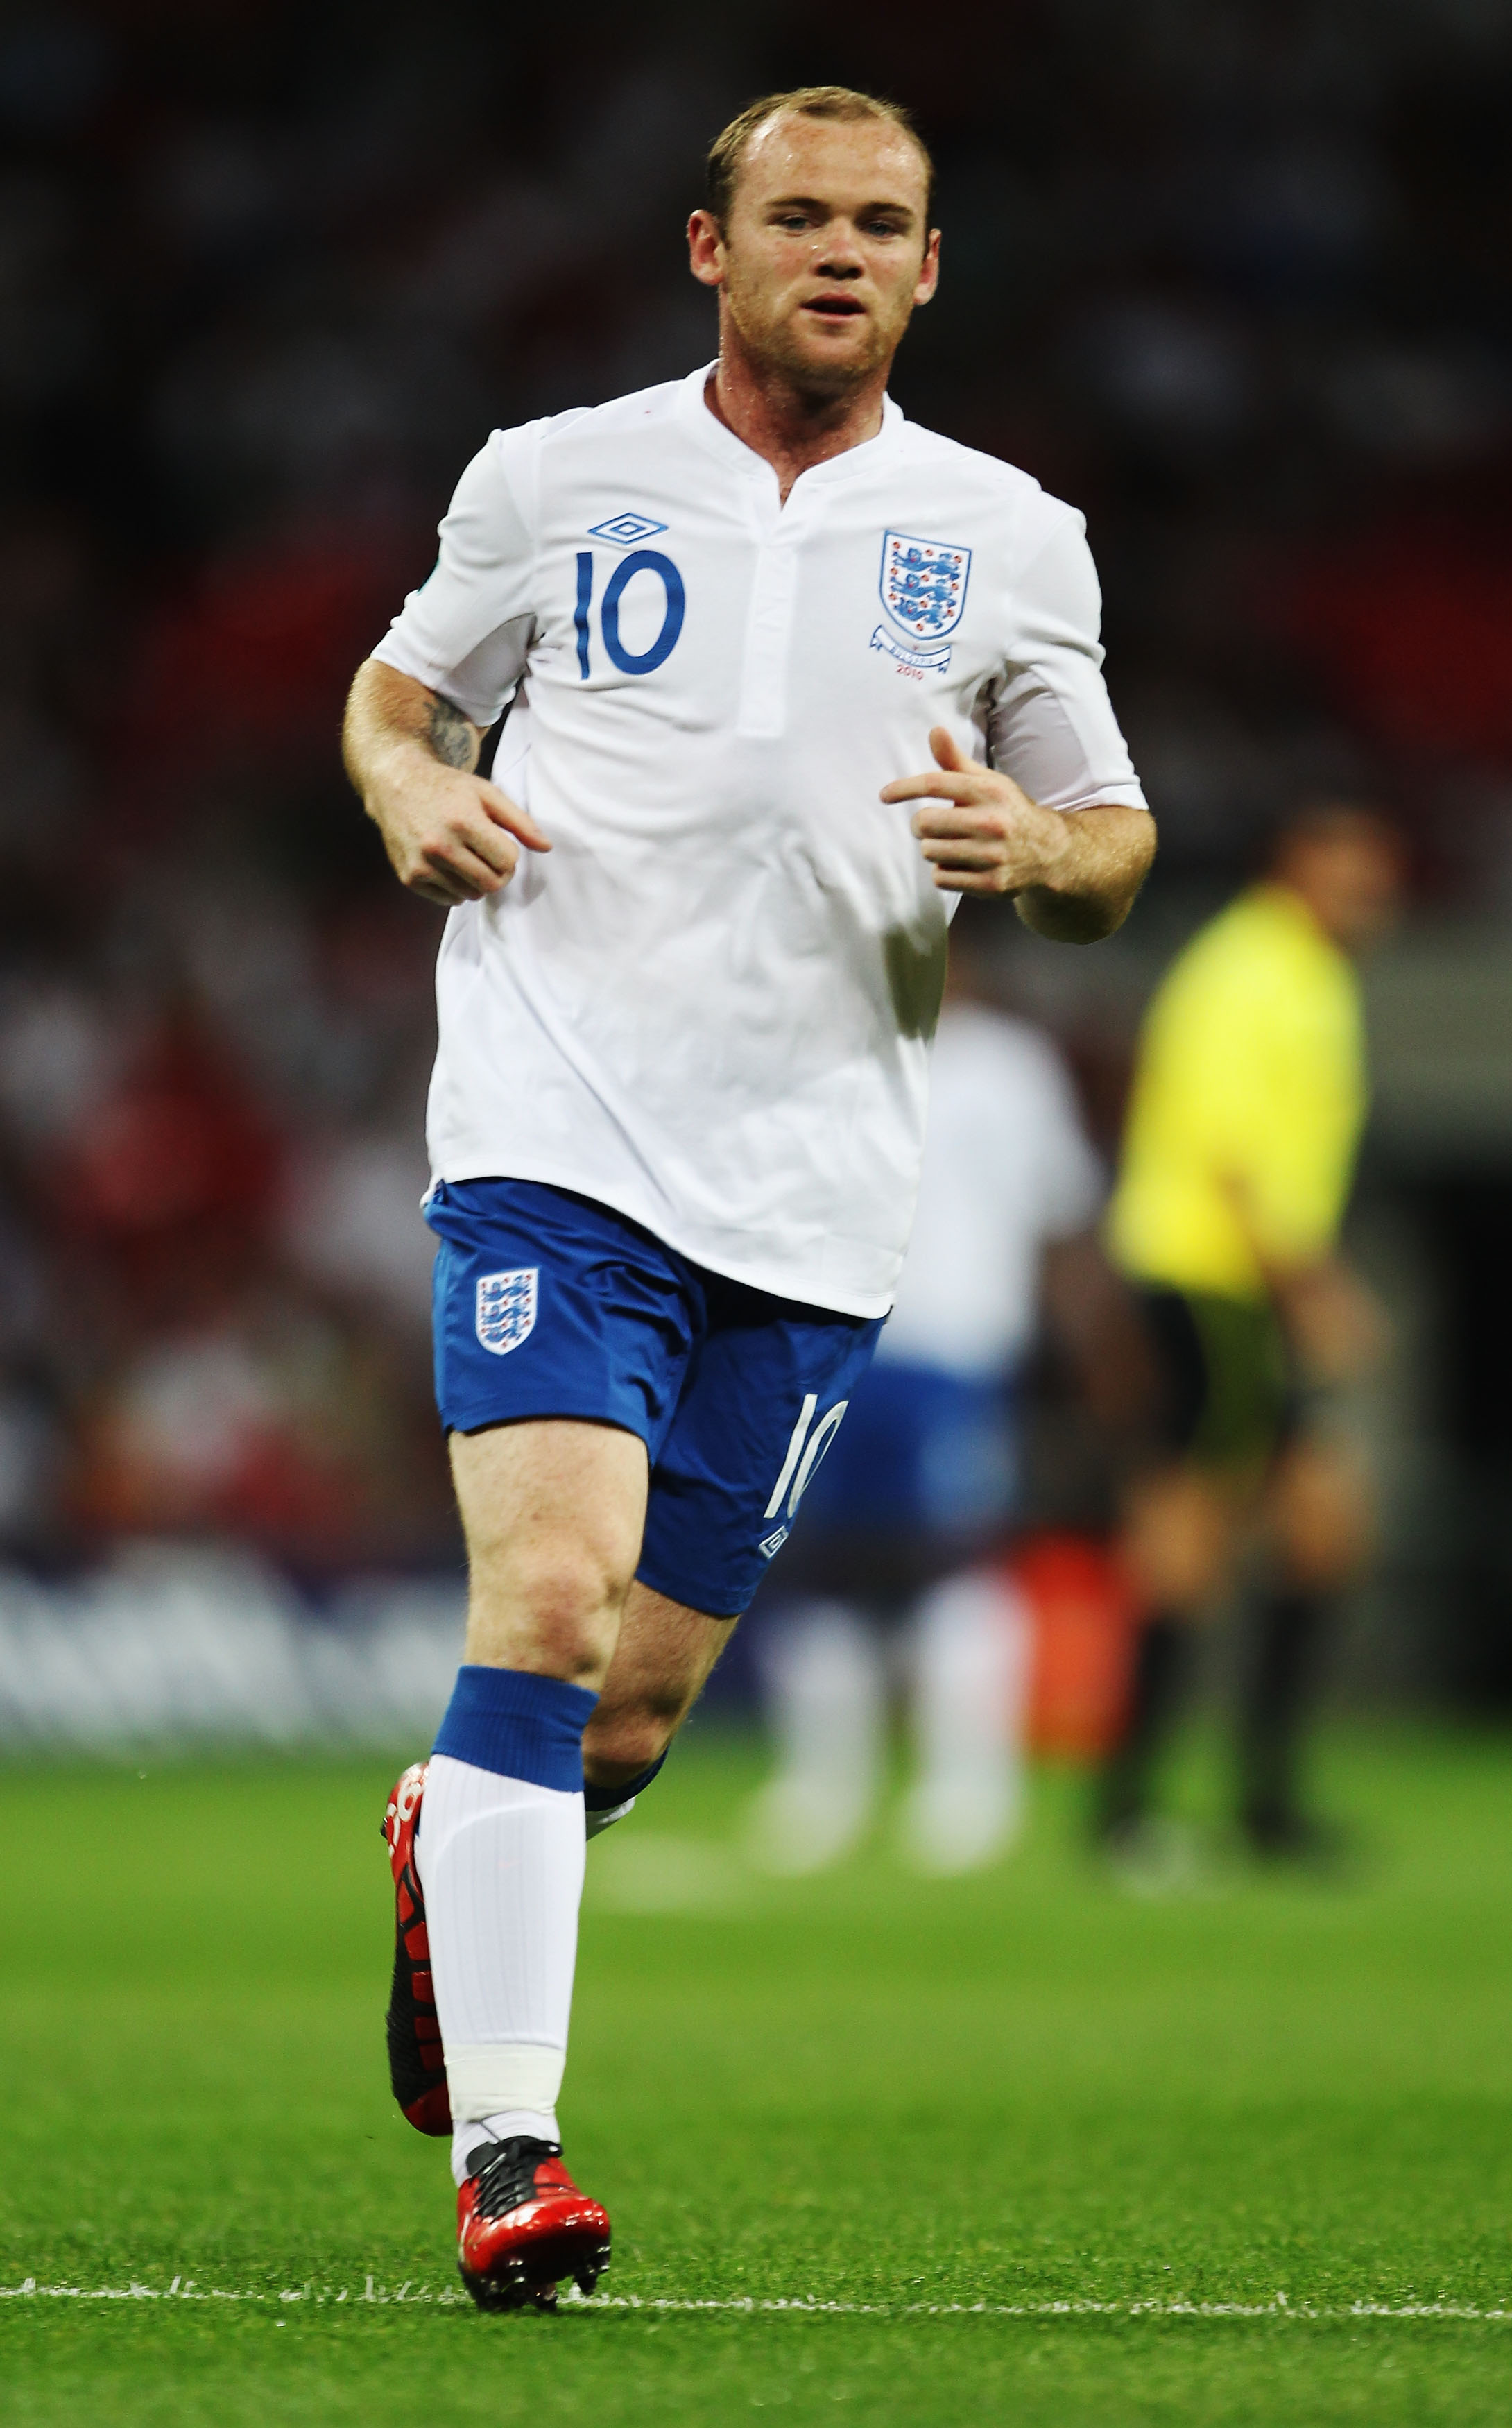 LONDON, ENGLAND - SEPTEMBER 03:  Wayne Rooney of England is seen during the UEFA EURO 2012 Group G Qualifying match between England and Bulgaria at Wembley Stadium on September 3, 2010 in London, England.  (Photo by Bryn Lennon/Getty Images)